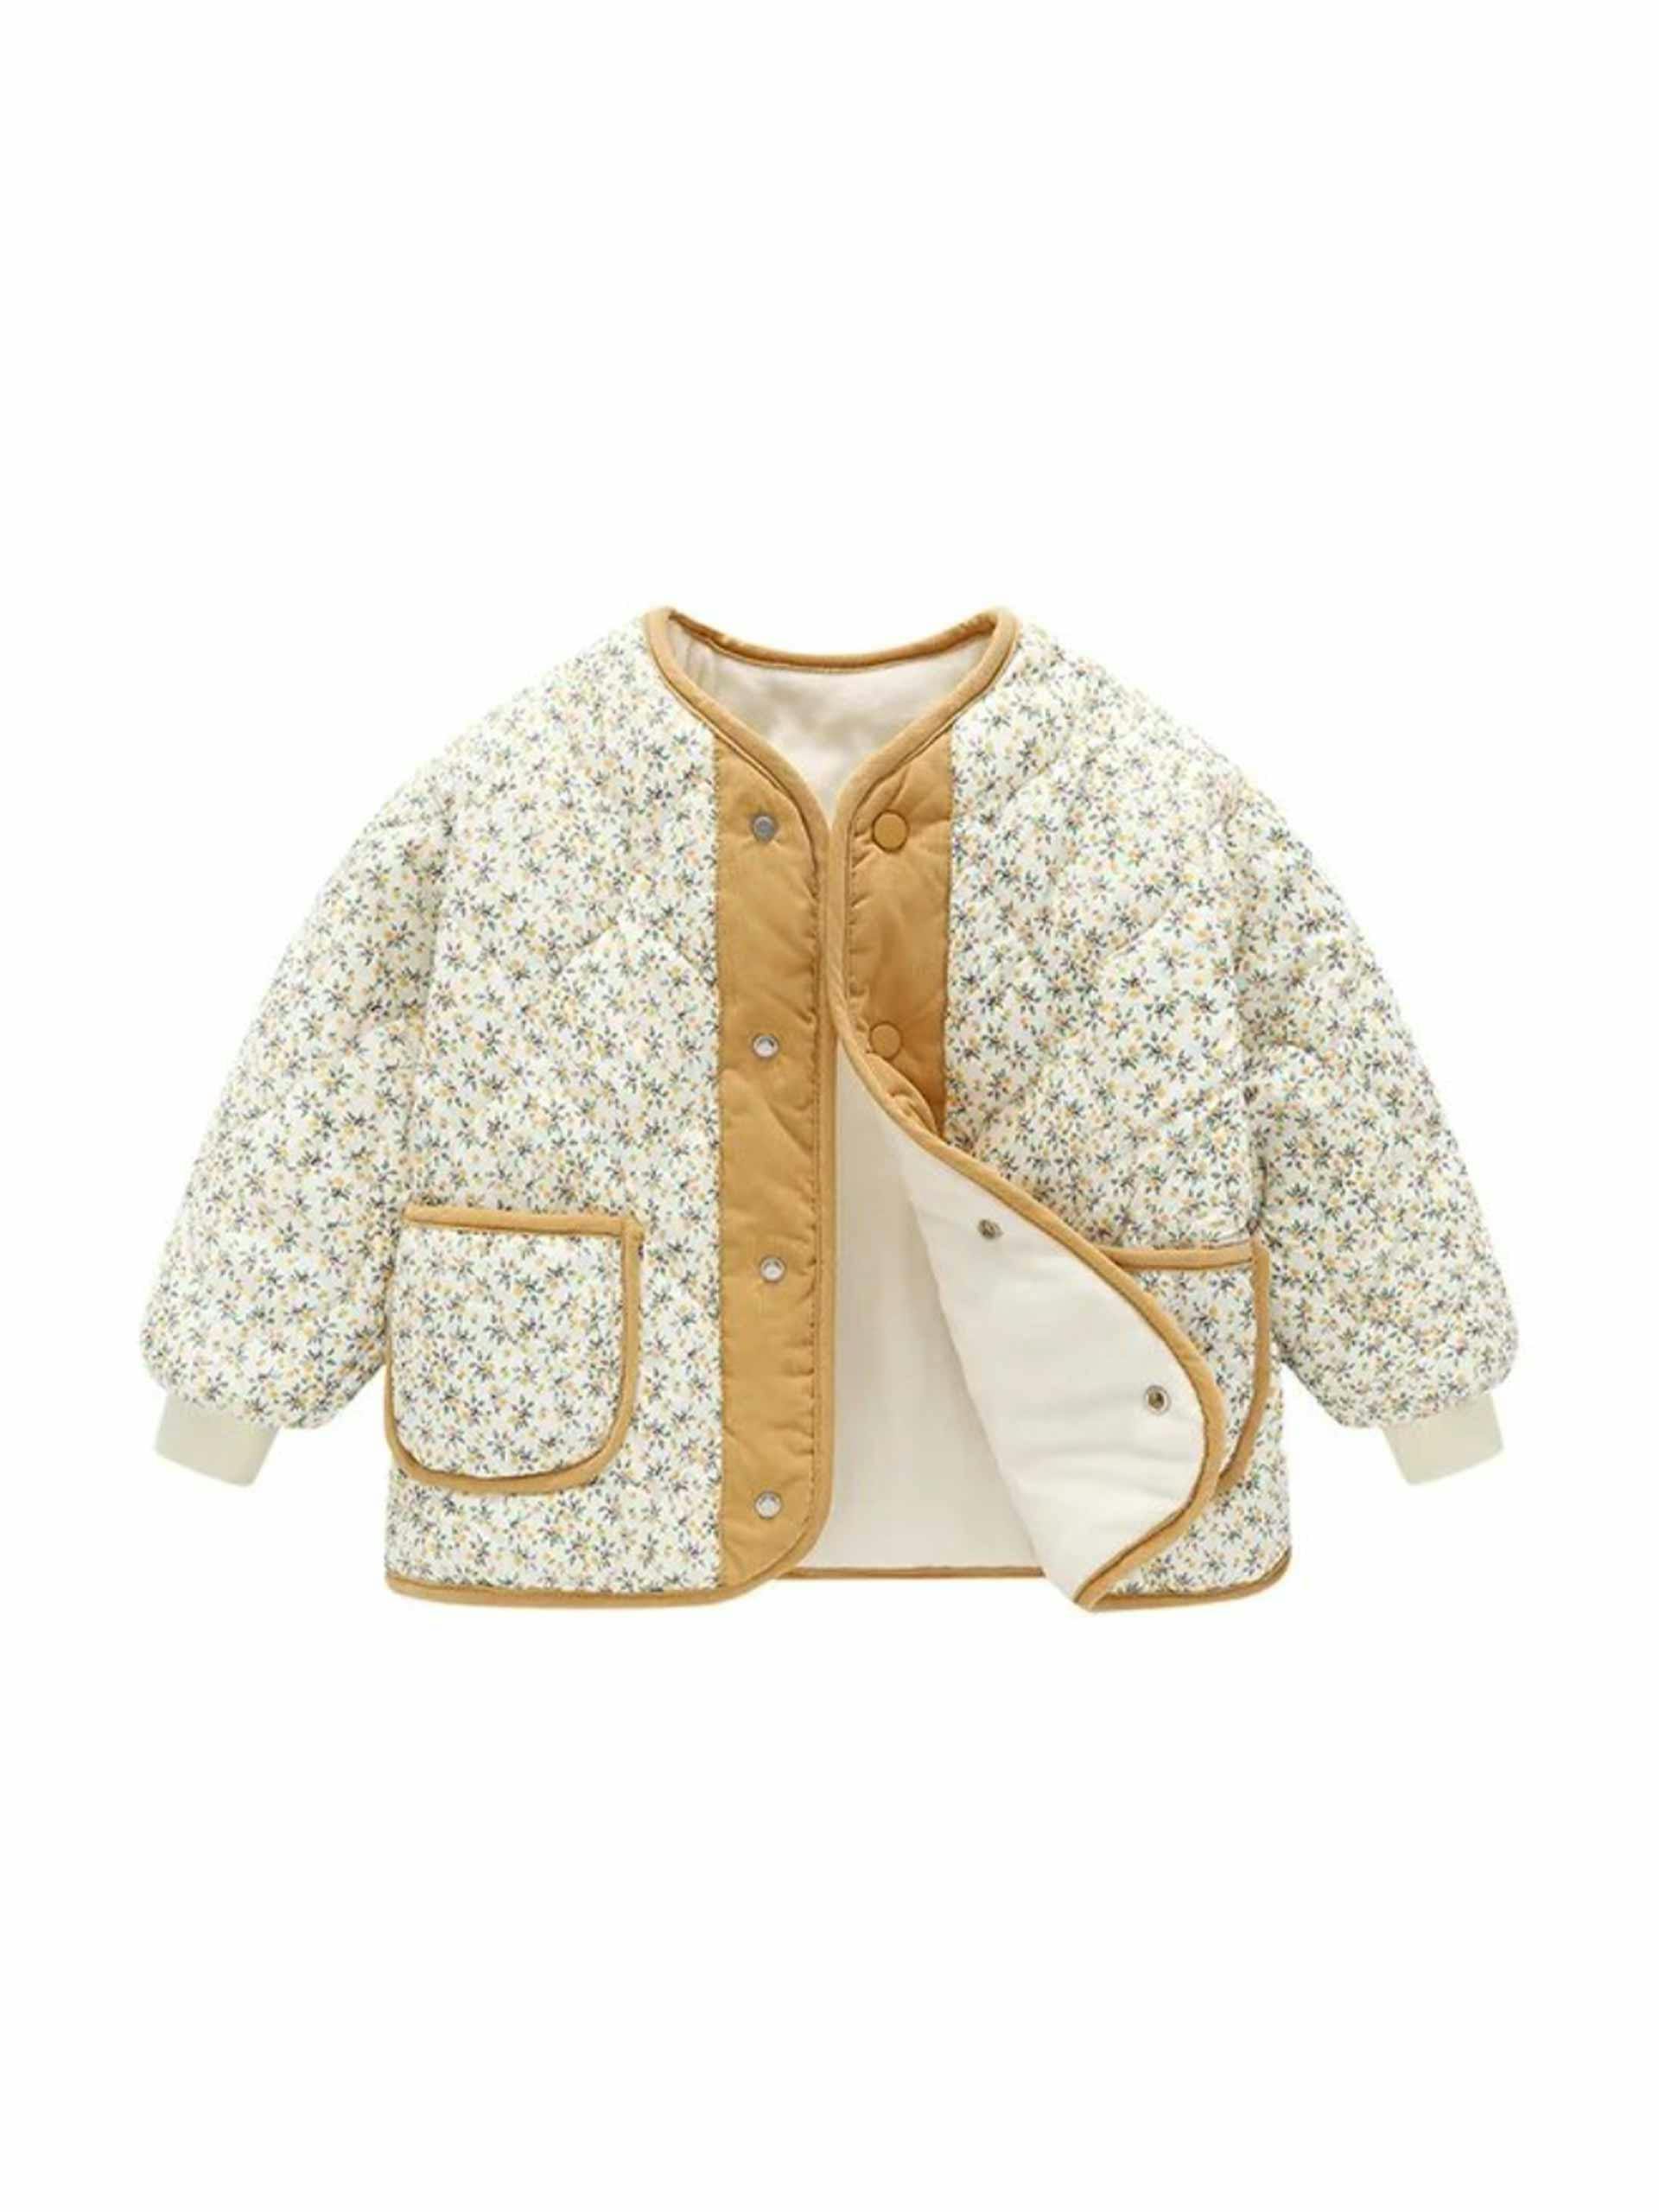 Padded cotton floral print jacket